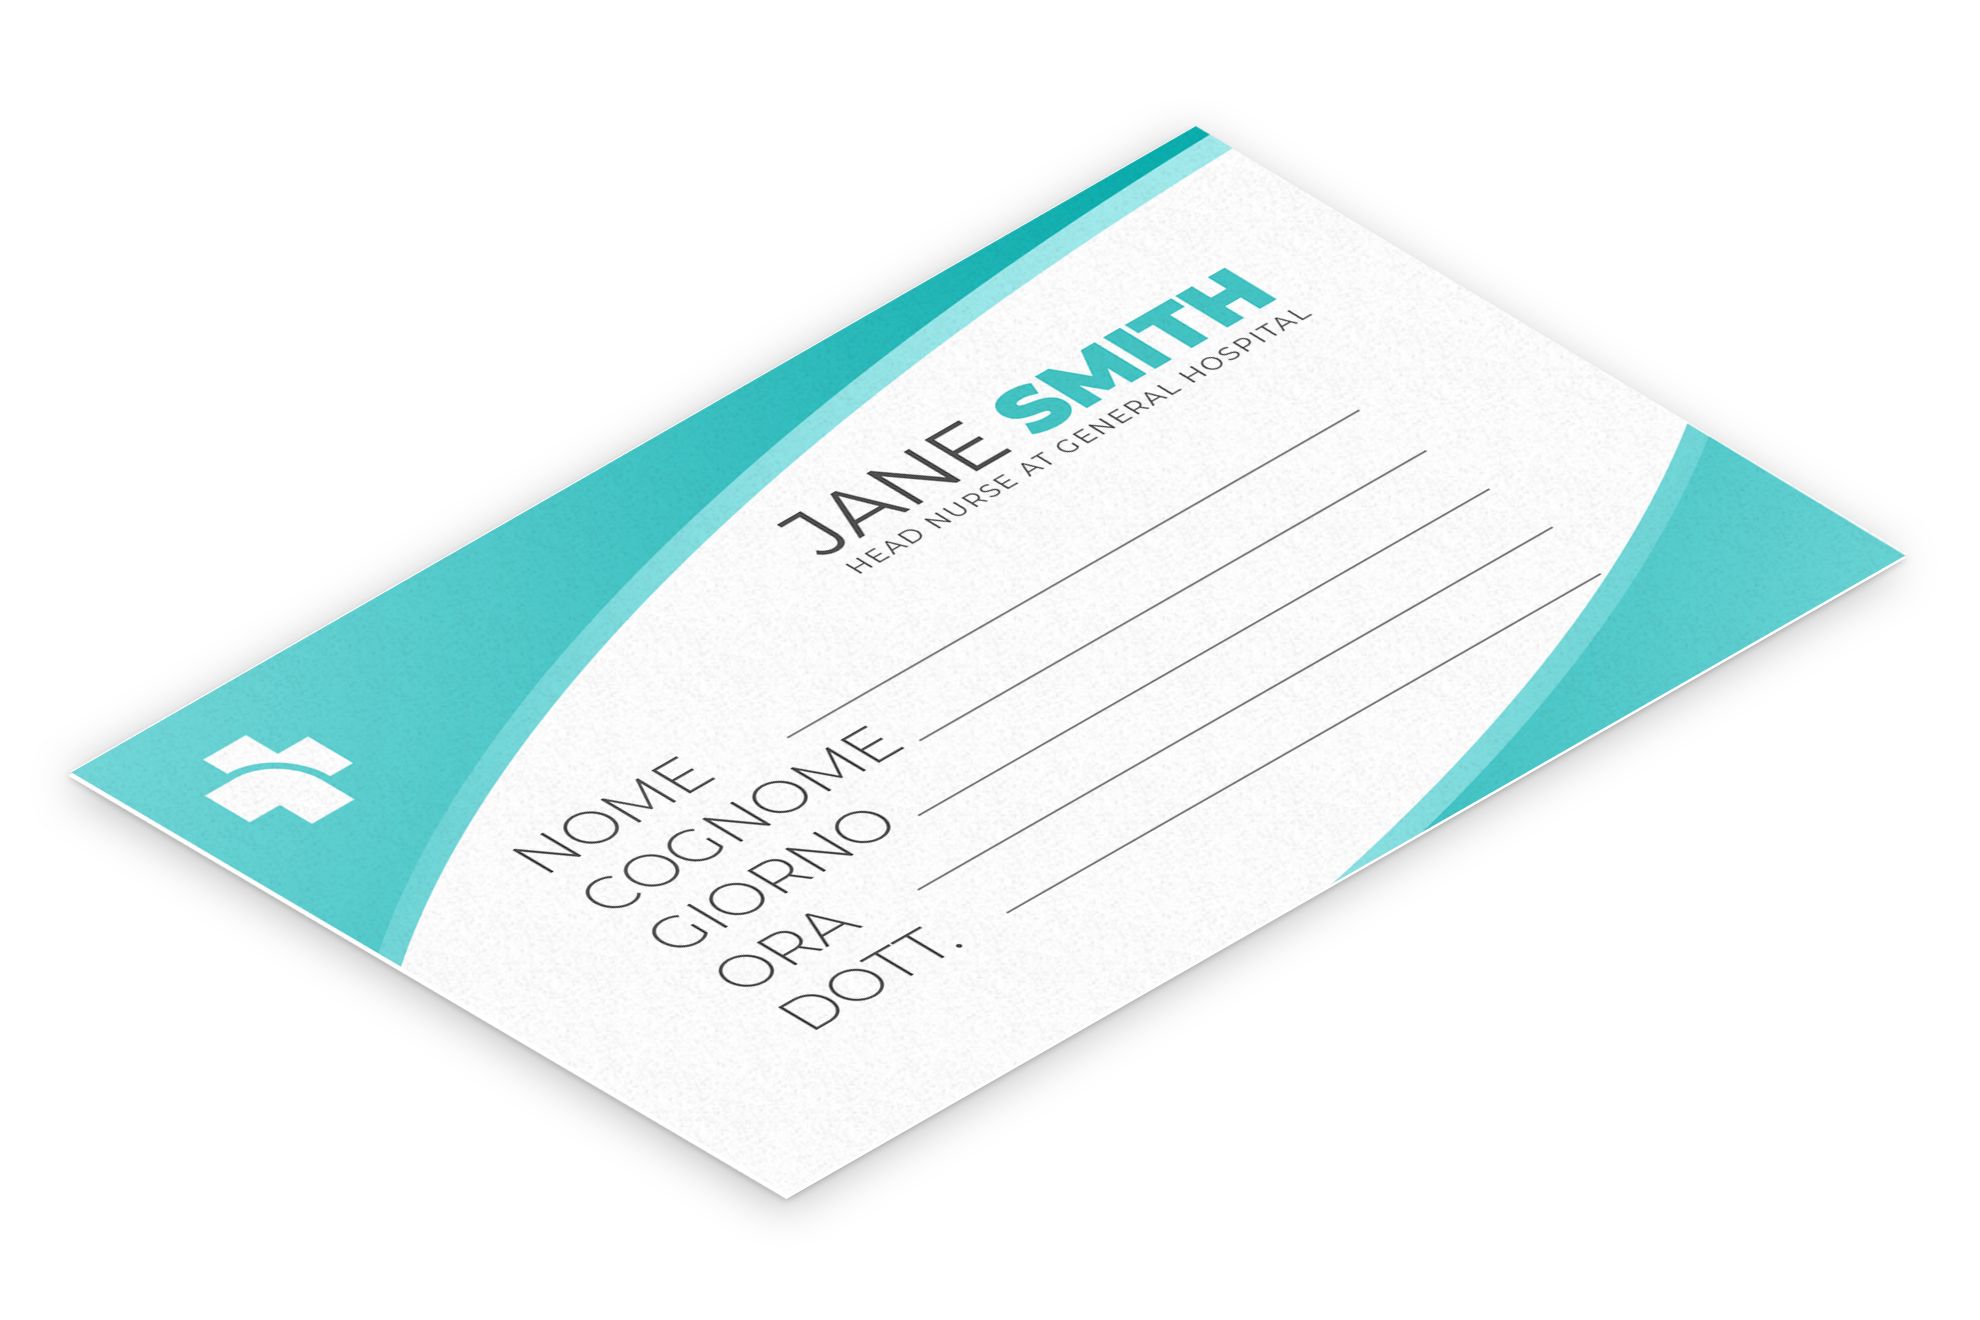 Appointment Reminder Cards Custom Printing Online UK: Are you looking for a appointment reminder cards? Entrust you to the online service of Sprint24: quality at small prices. Configure now your products!